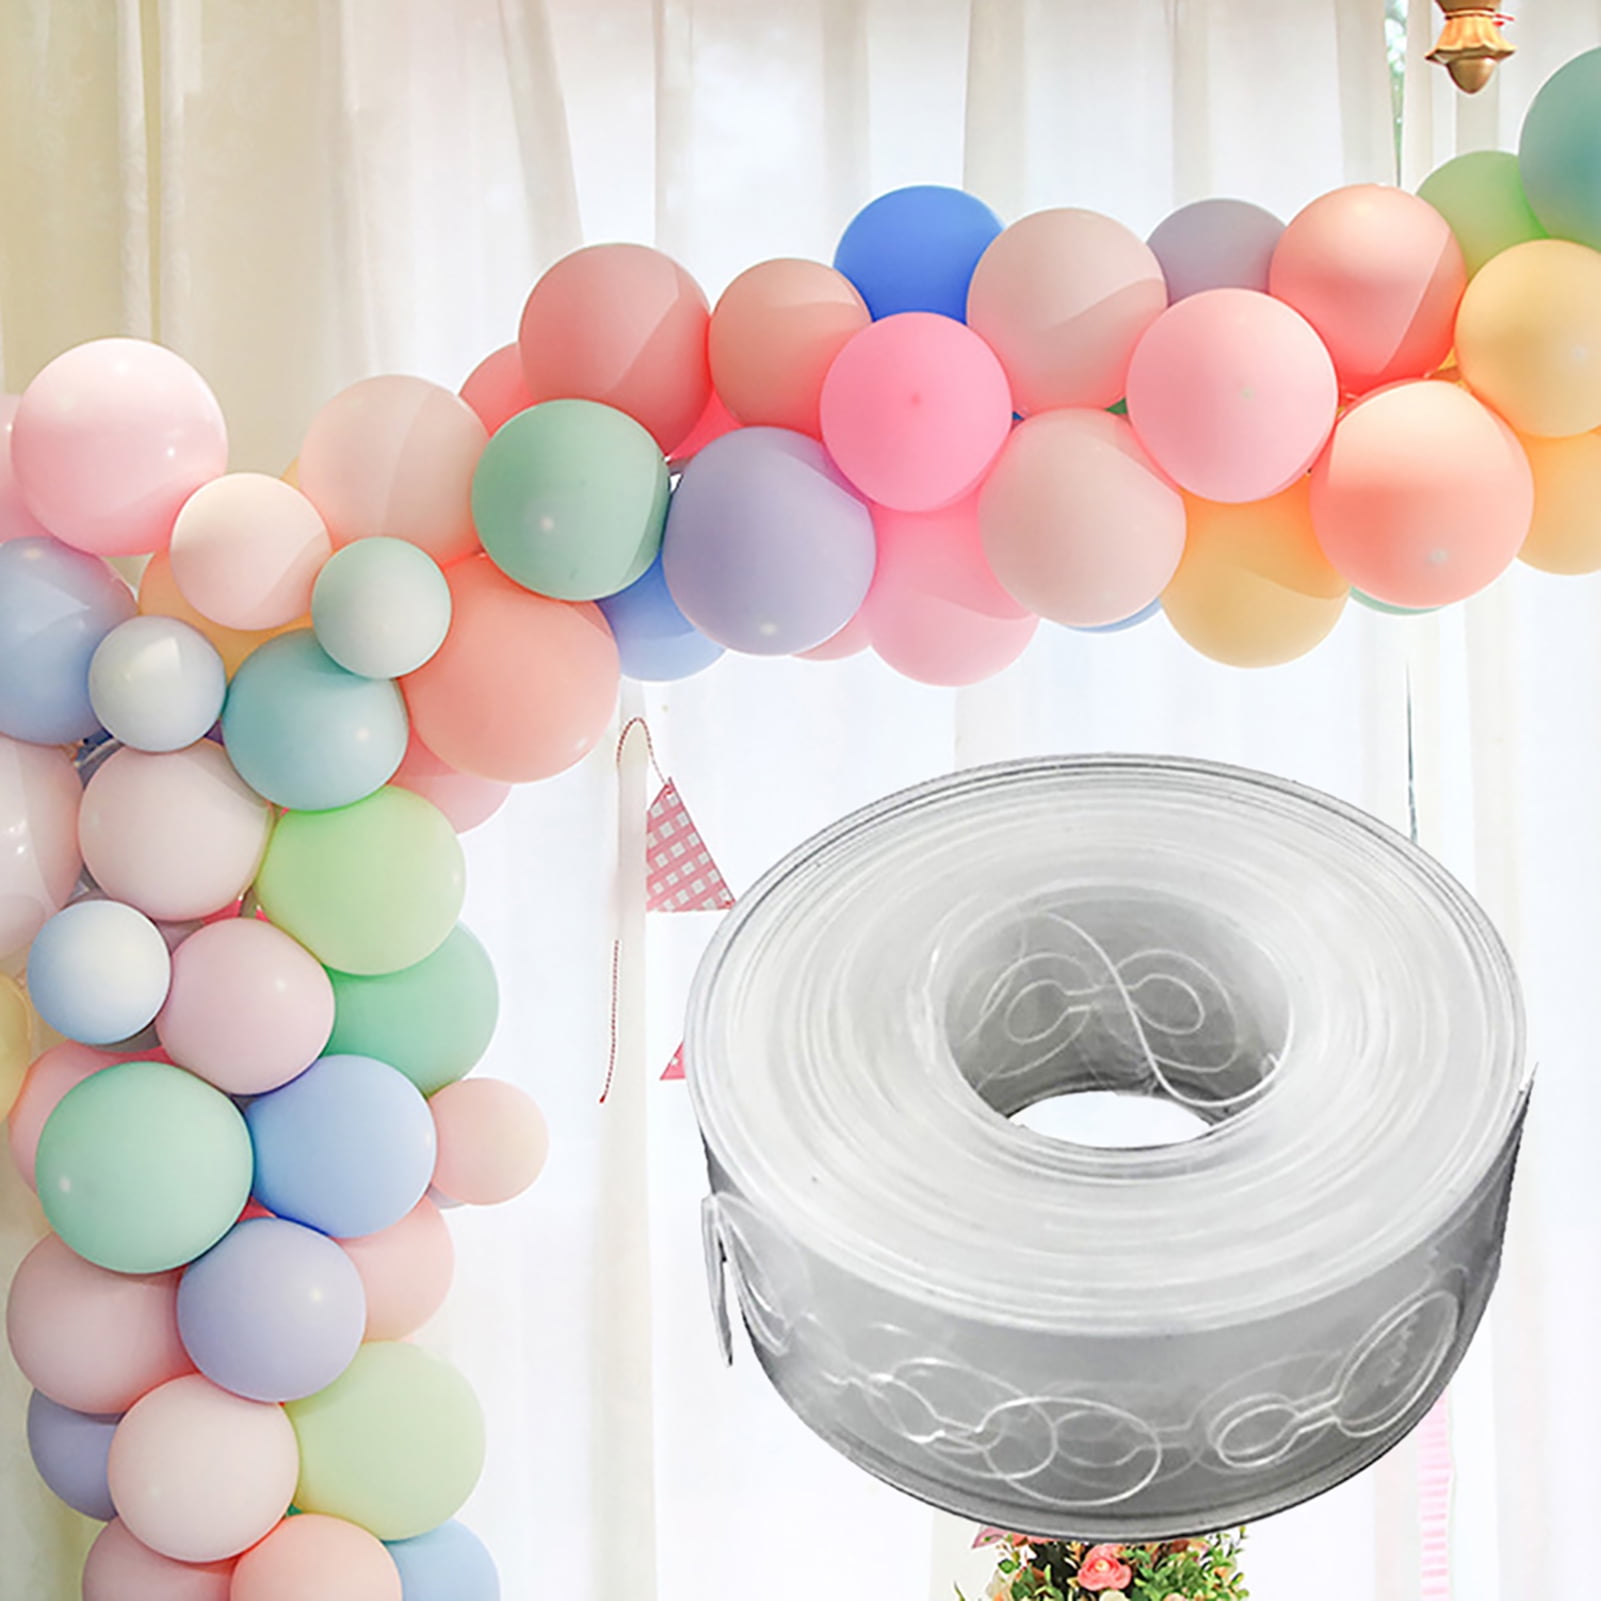 Ribbon Balloon Strings Ribbons For String Gift Wrapping Balloons Flowers  Bows Wedding Or Birthday Party Decoration